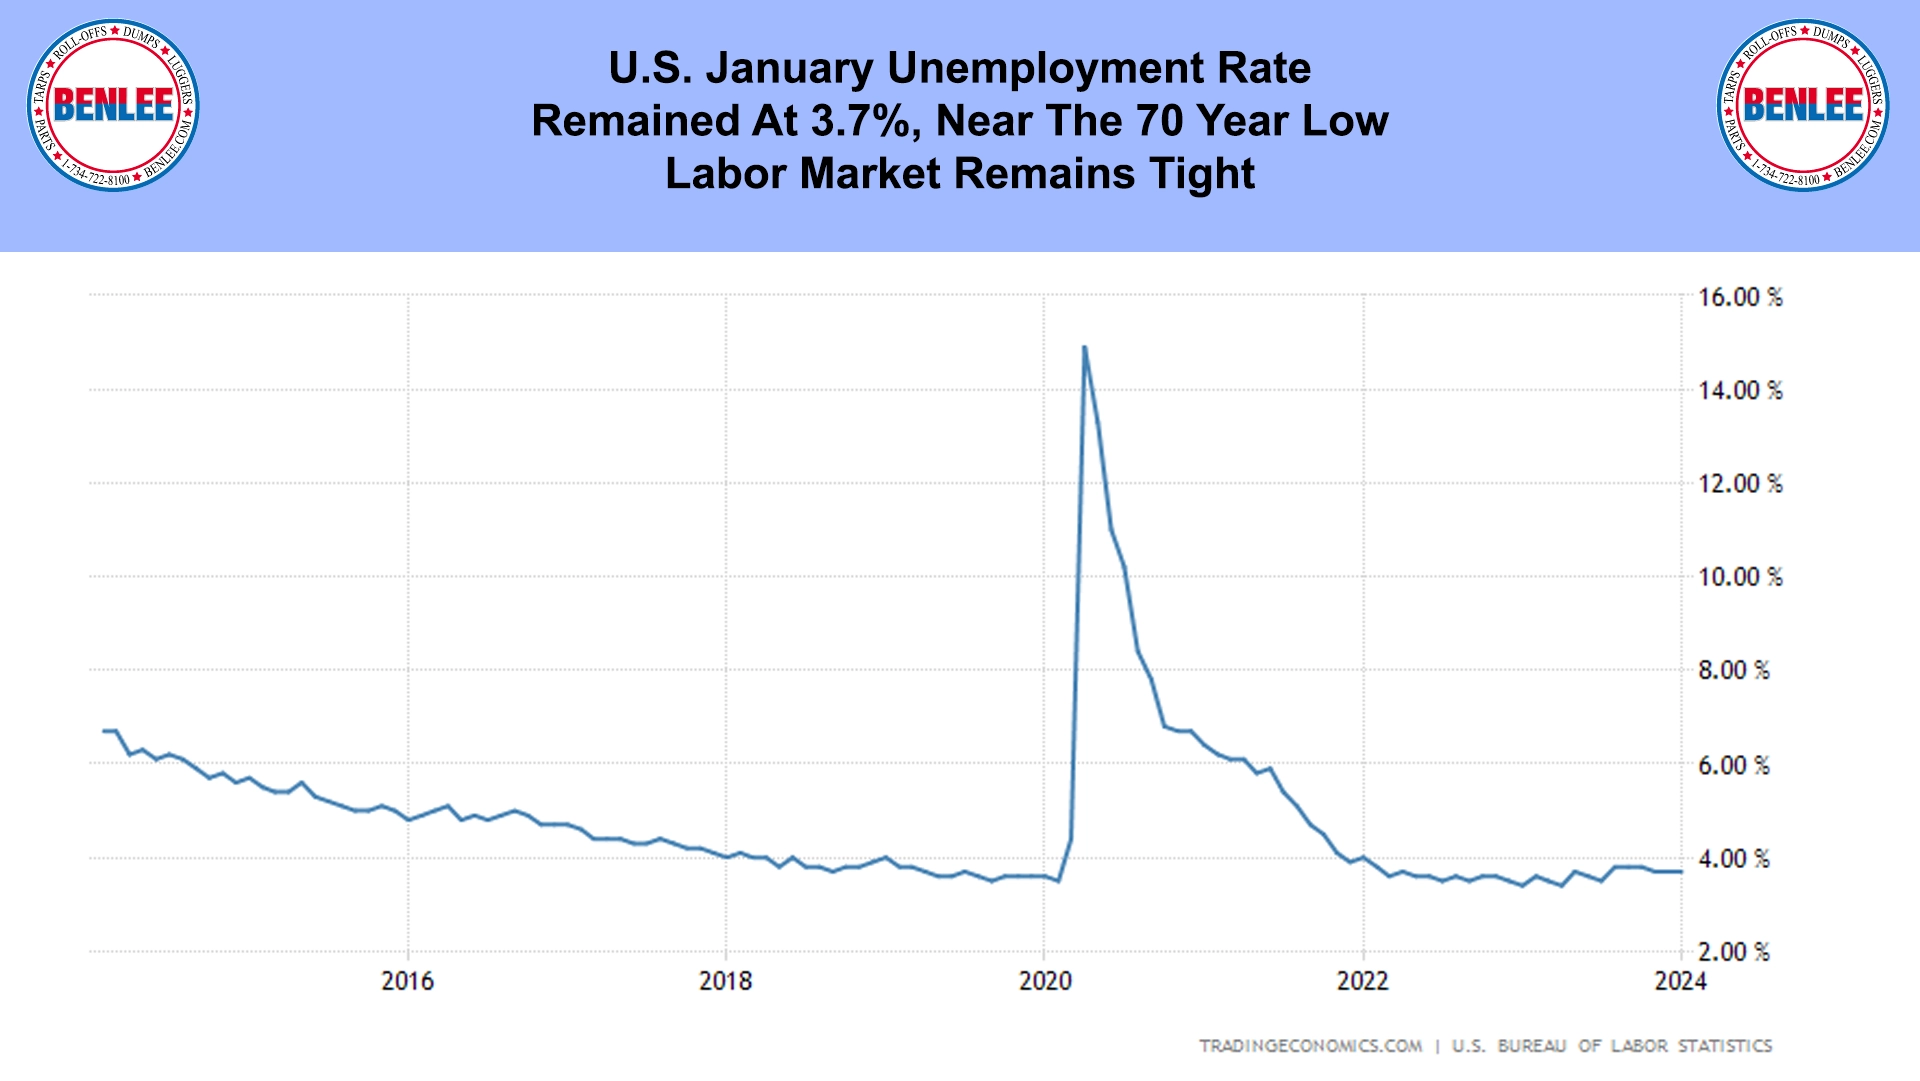 U.S. January Unemployment Rate